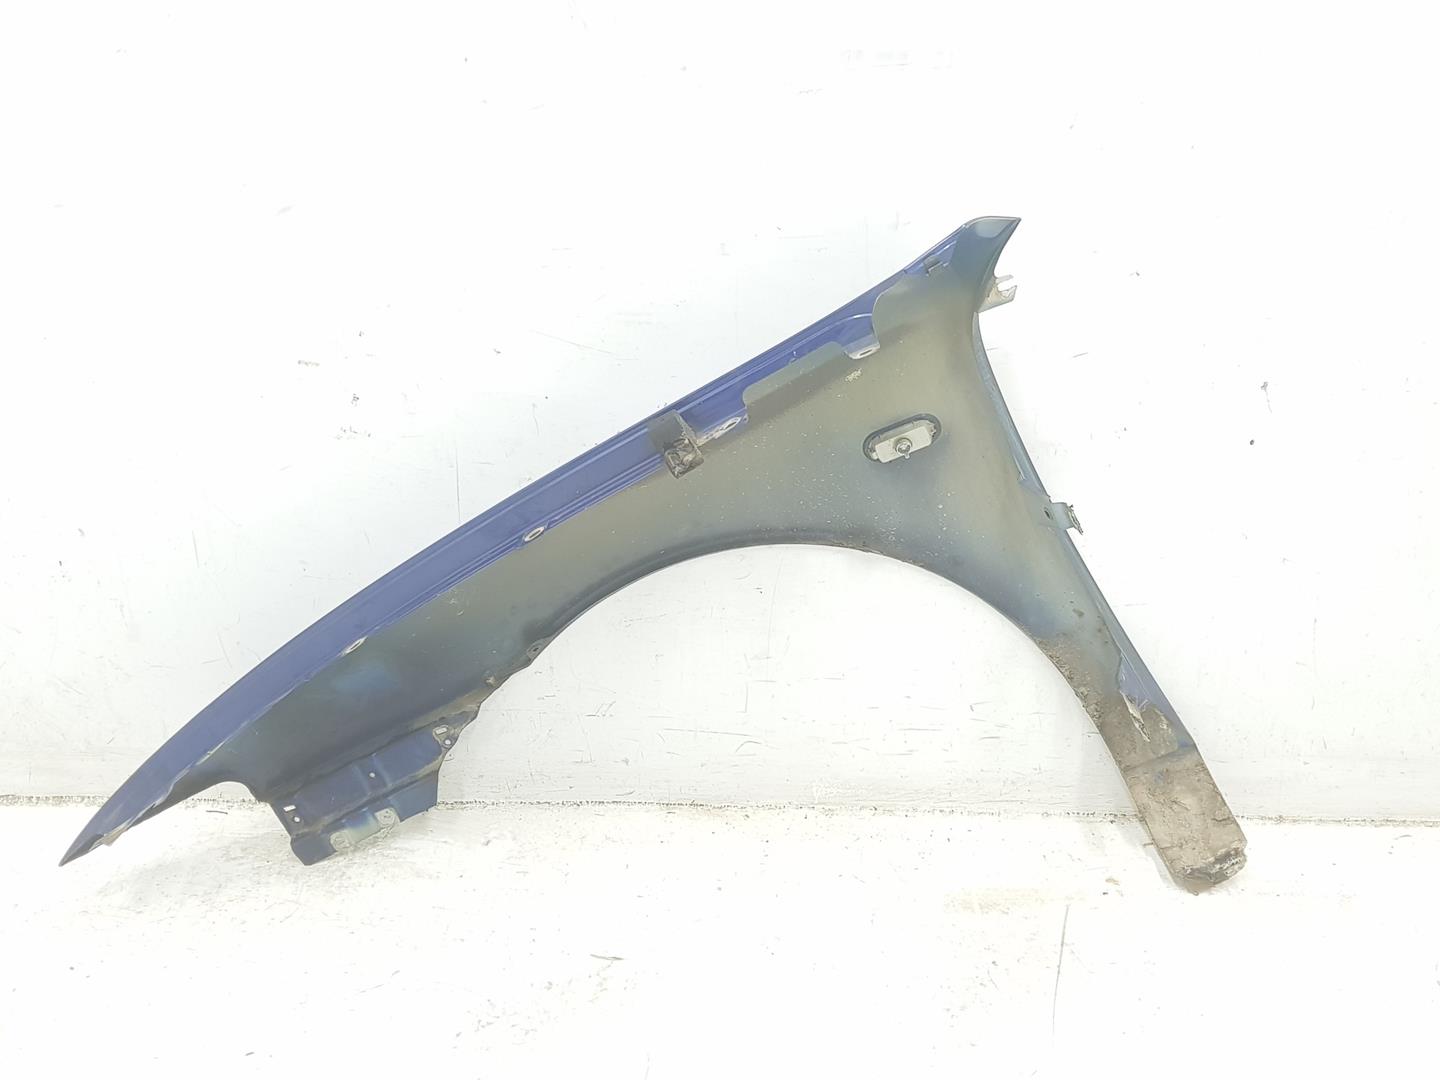 SEAT Toledo 2 generation (1999-2006) Front Right Fender Molding 1M0821022, 1M0821022, COLORAZULIMPERIALS5N 24220157